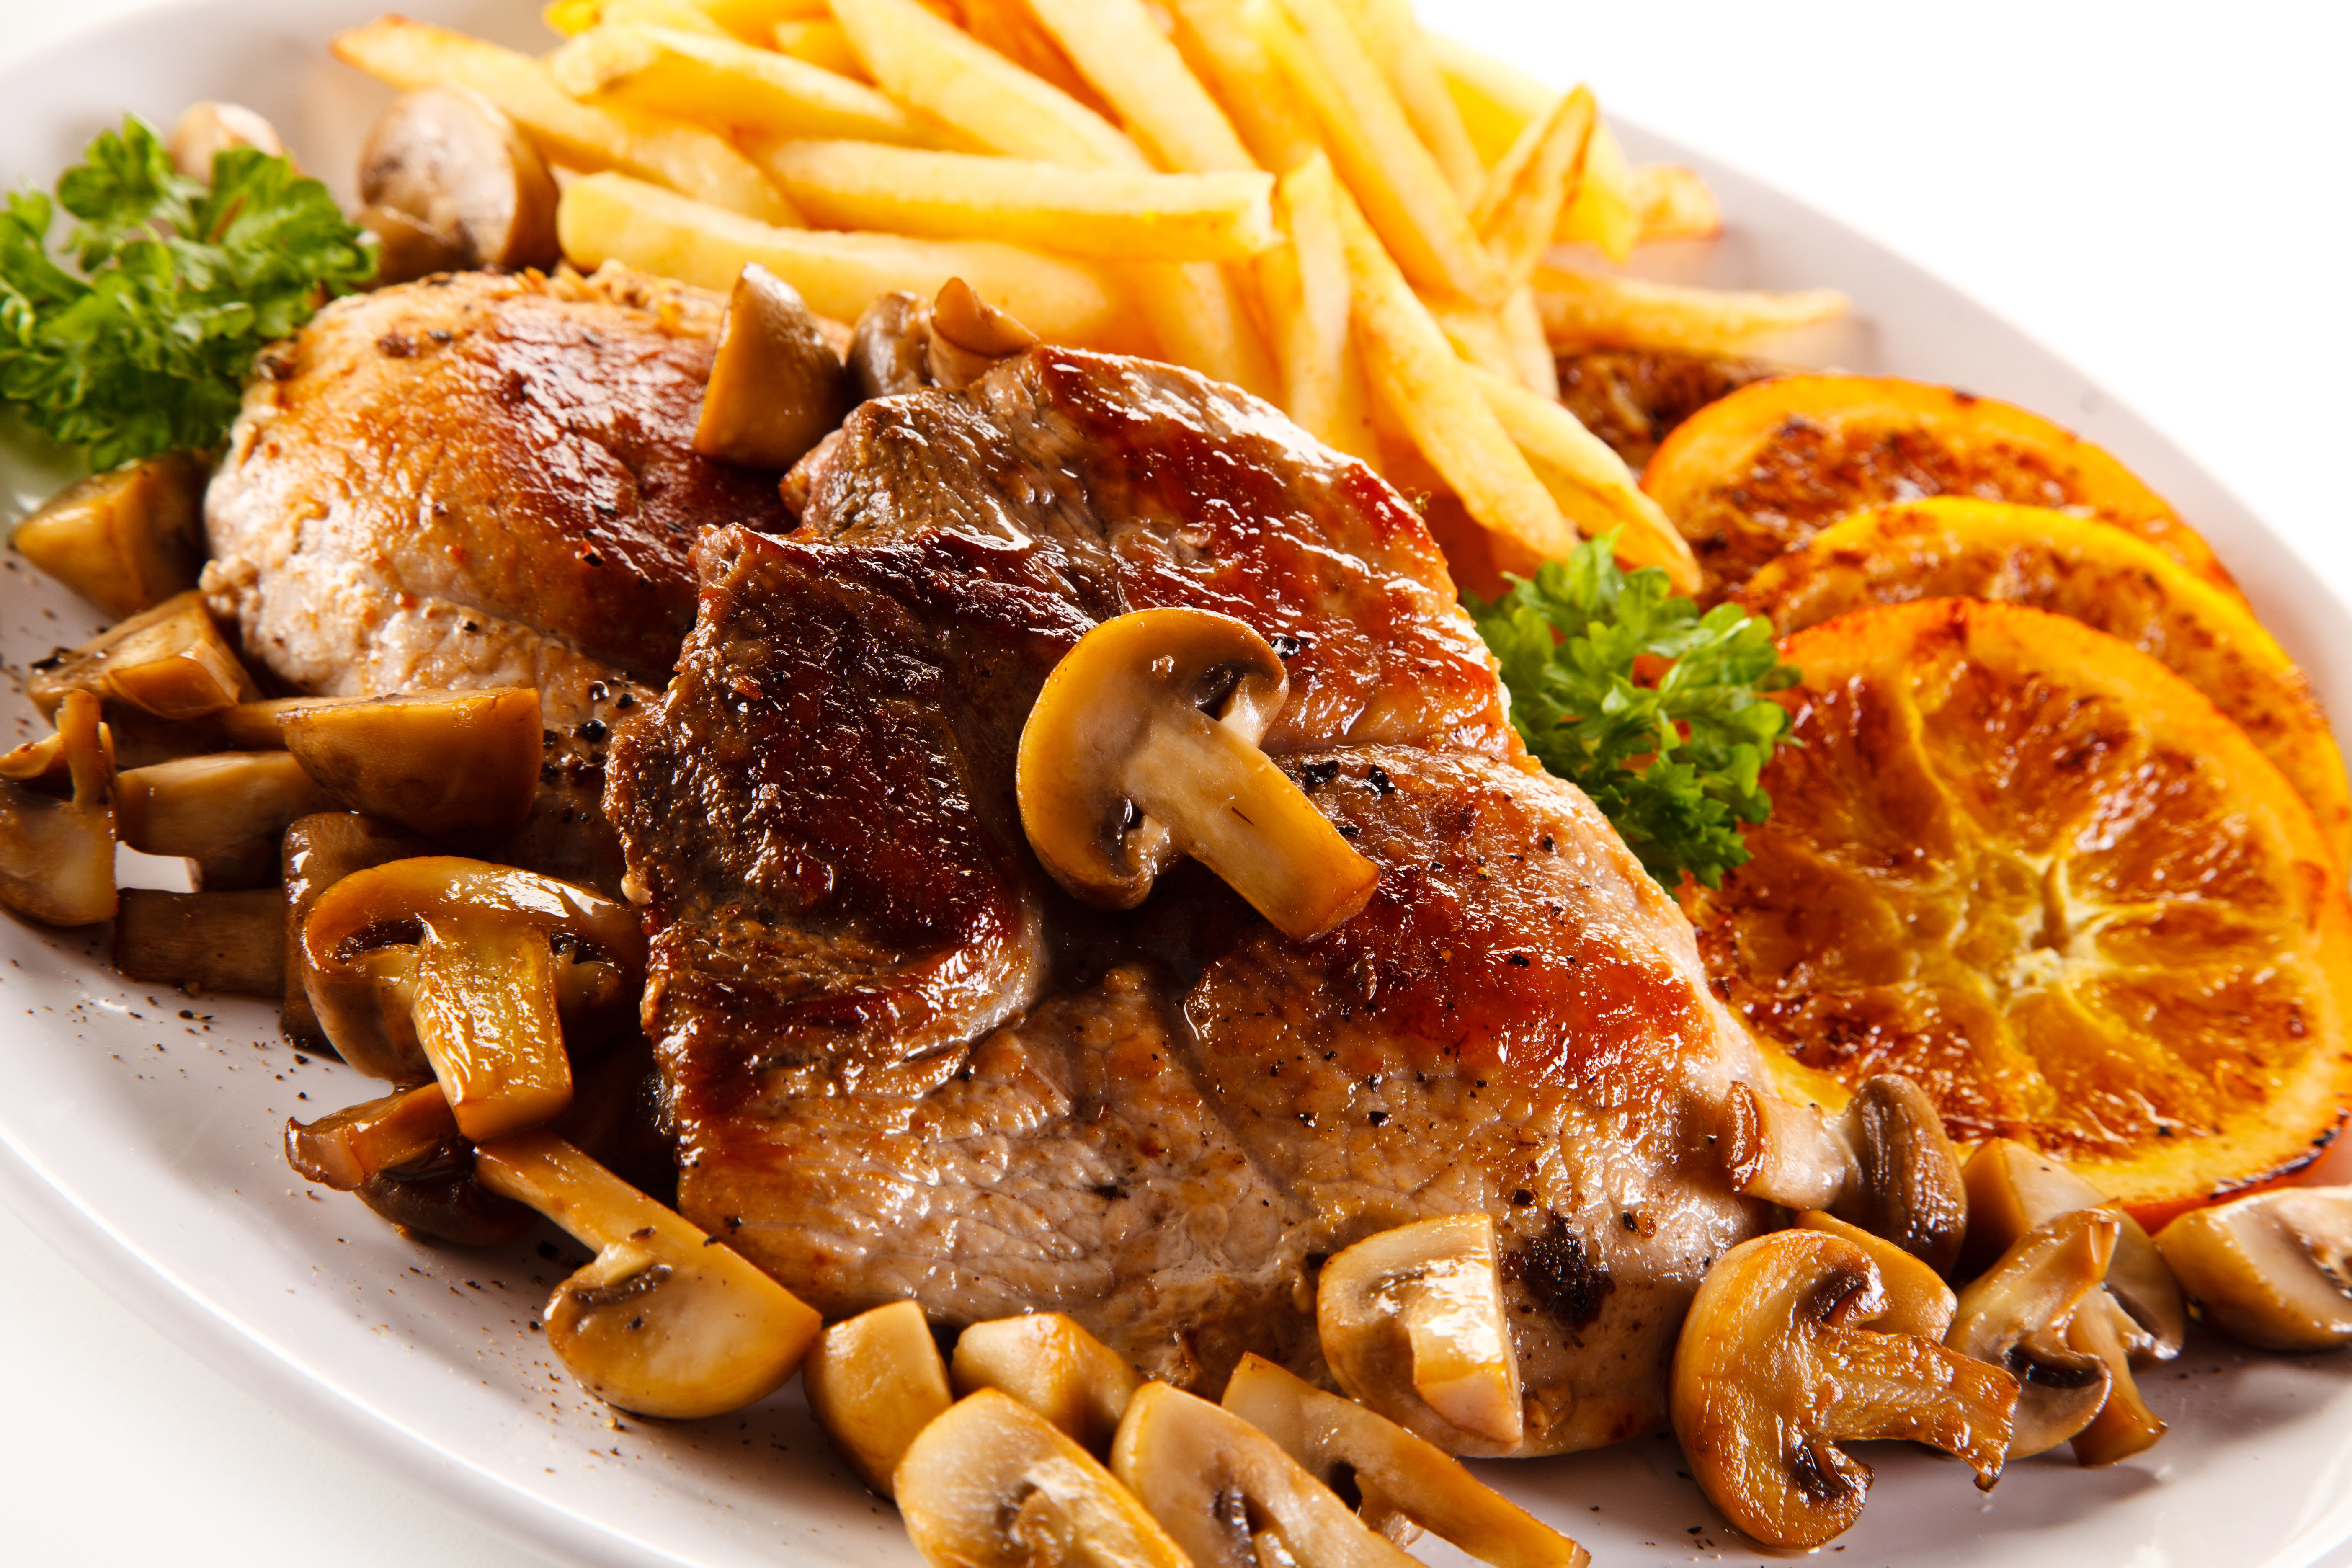 Meat, Mushroom, Meal, French Fries